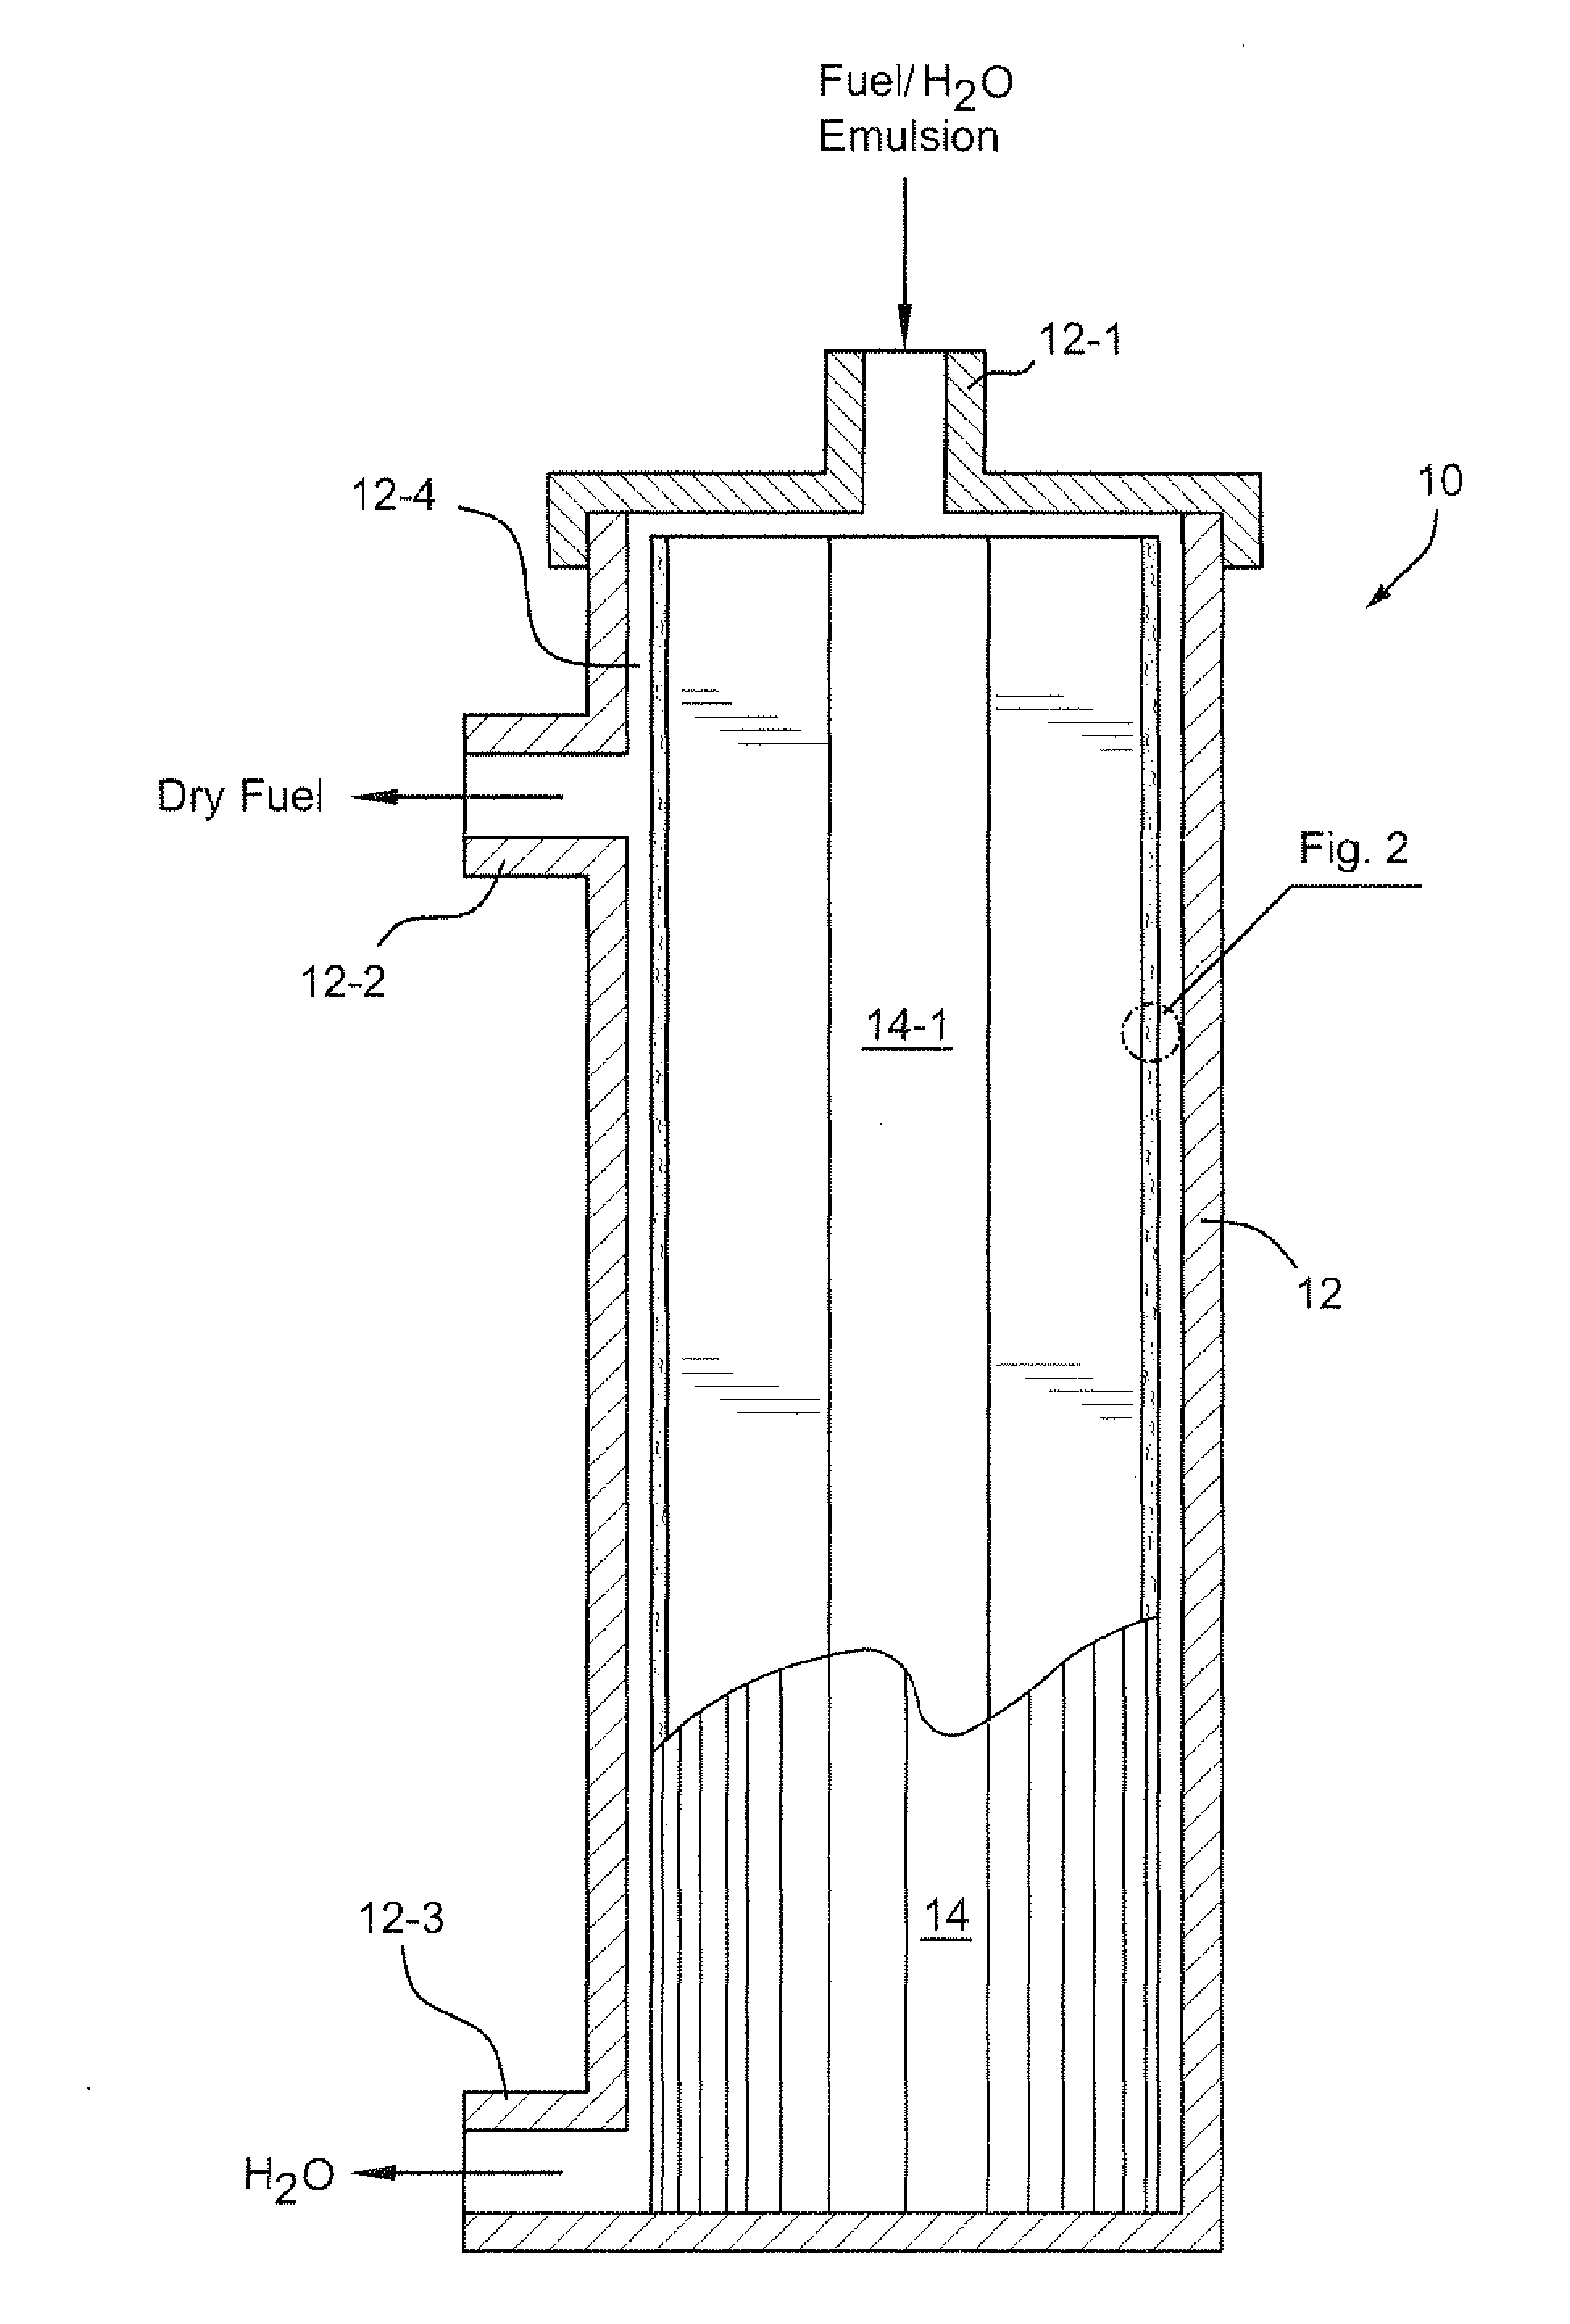 Separation media and methods especially useful for separating water-hydrocarbon emulsions having low interfacial tensions